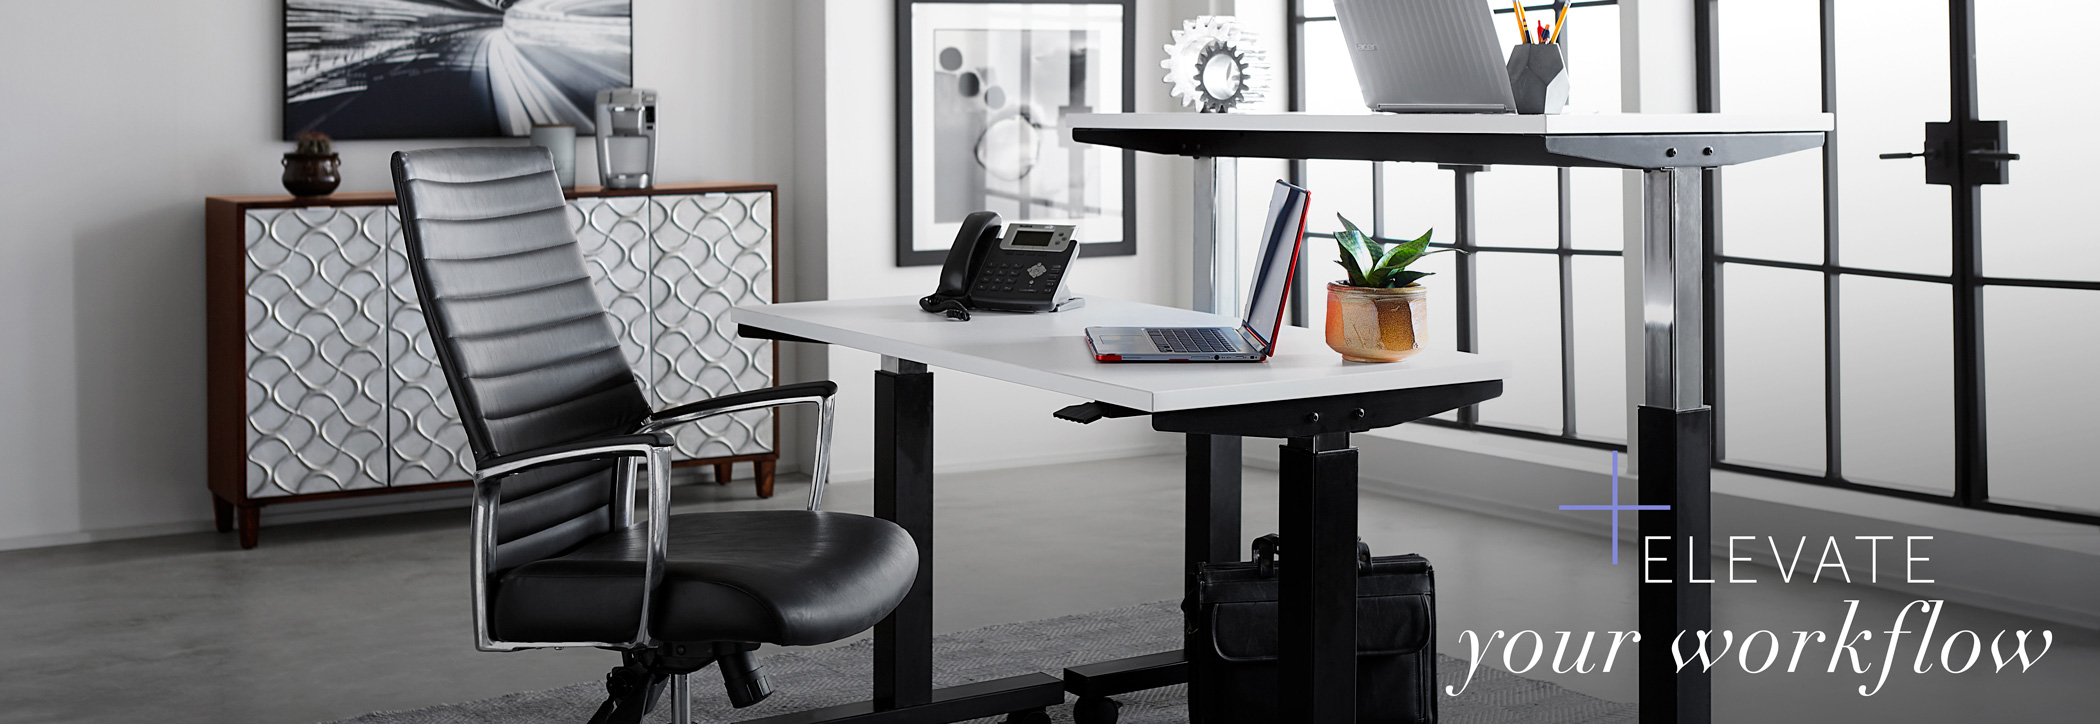 Office with rented standing desks with words ‘elevate your workflow”